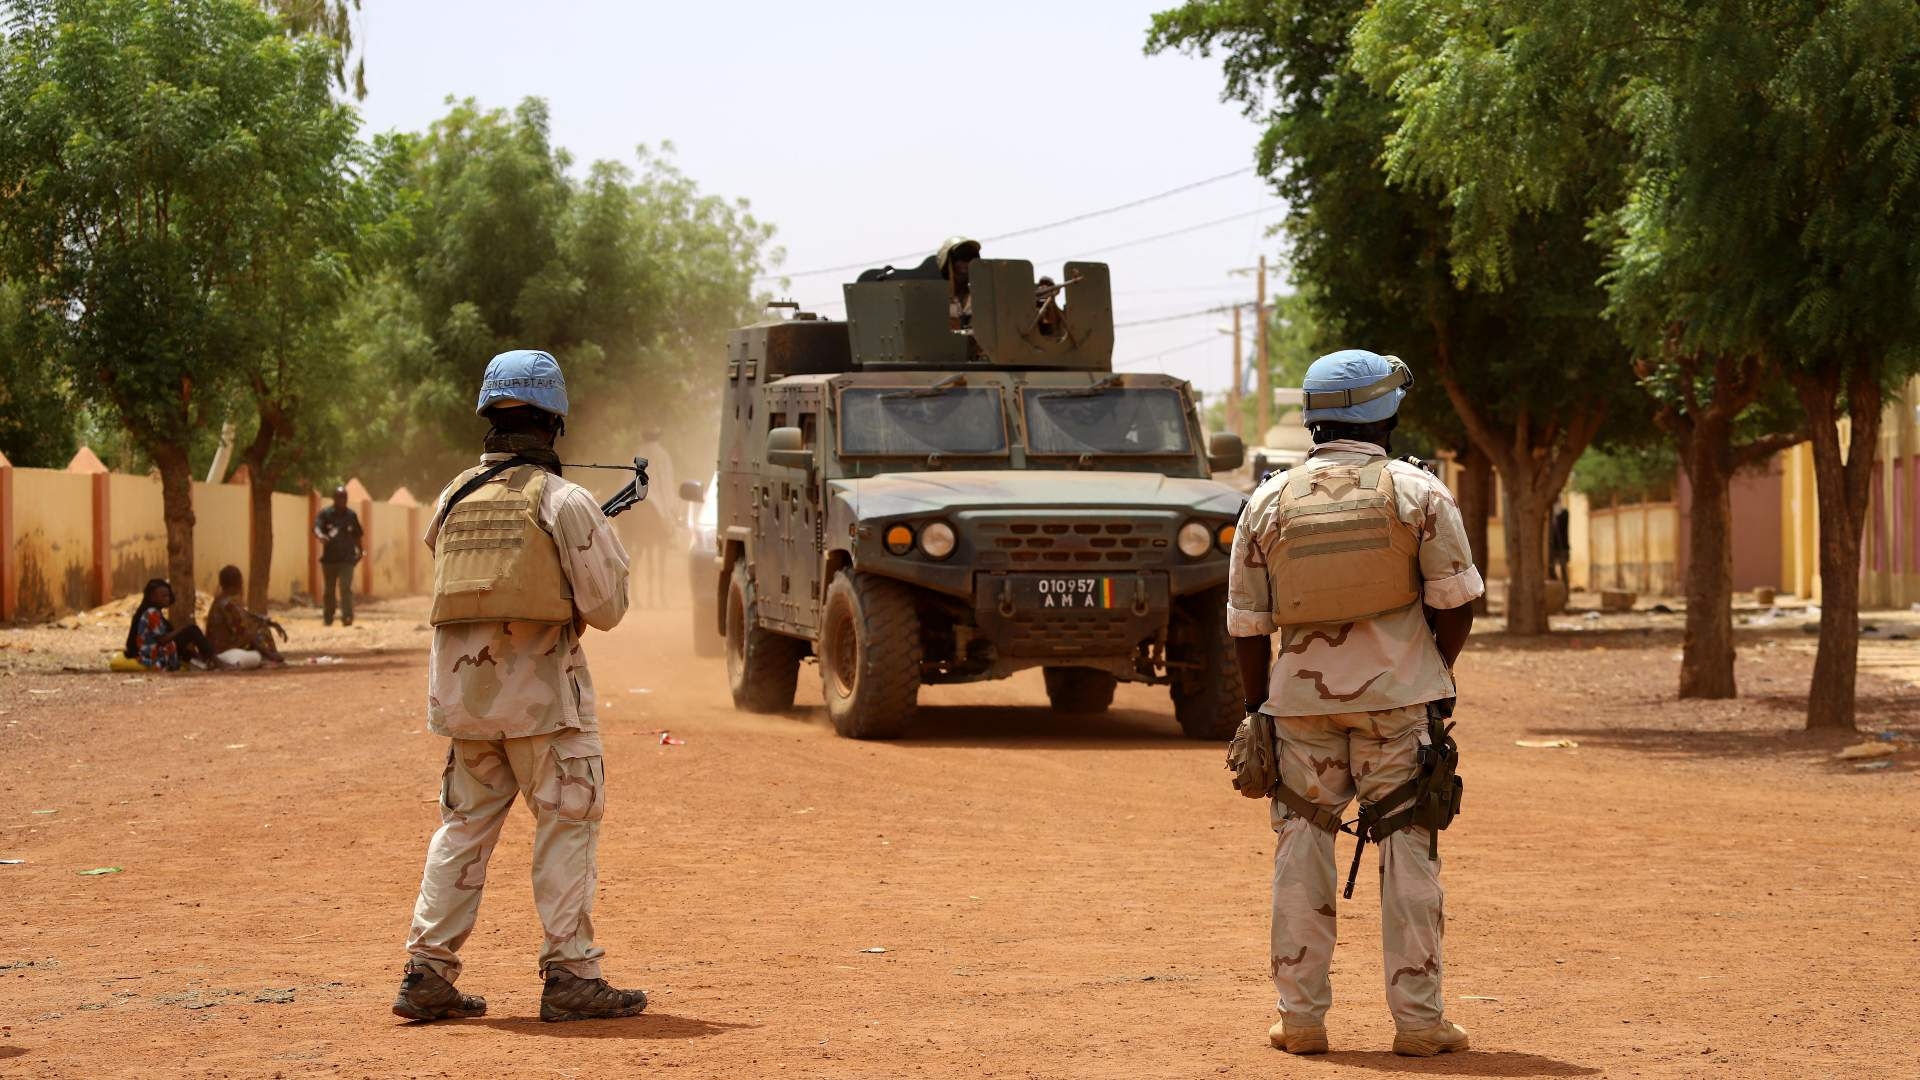 Senegalese soldiers of the UN peacekeeping mission in Mali patrol in the streets of Gao, on 24 July 2019.